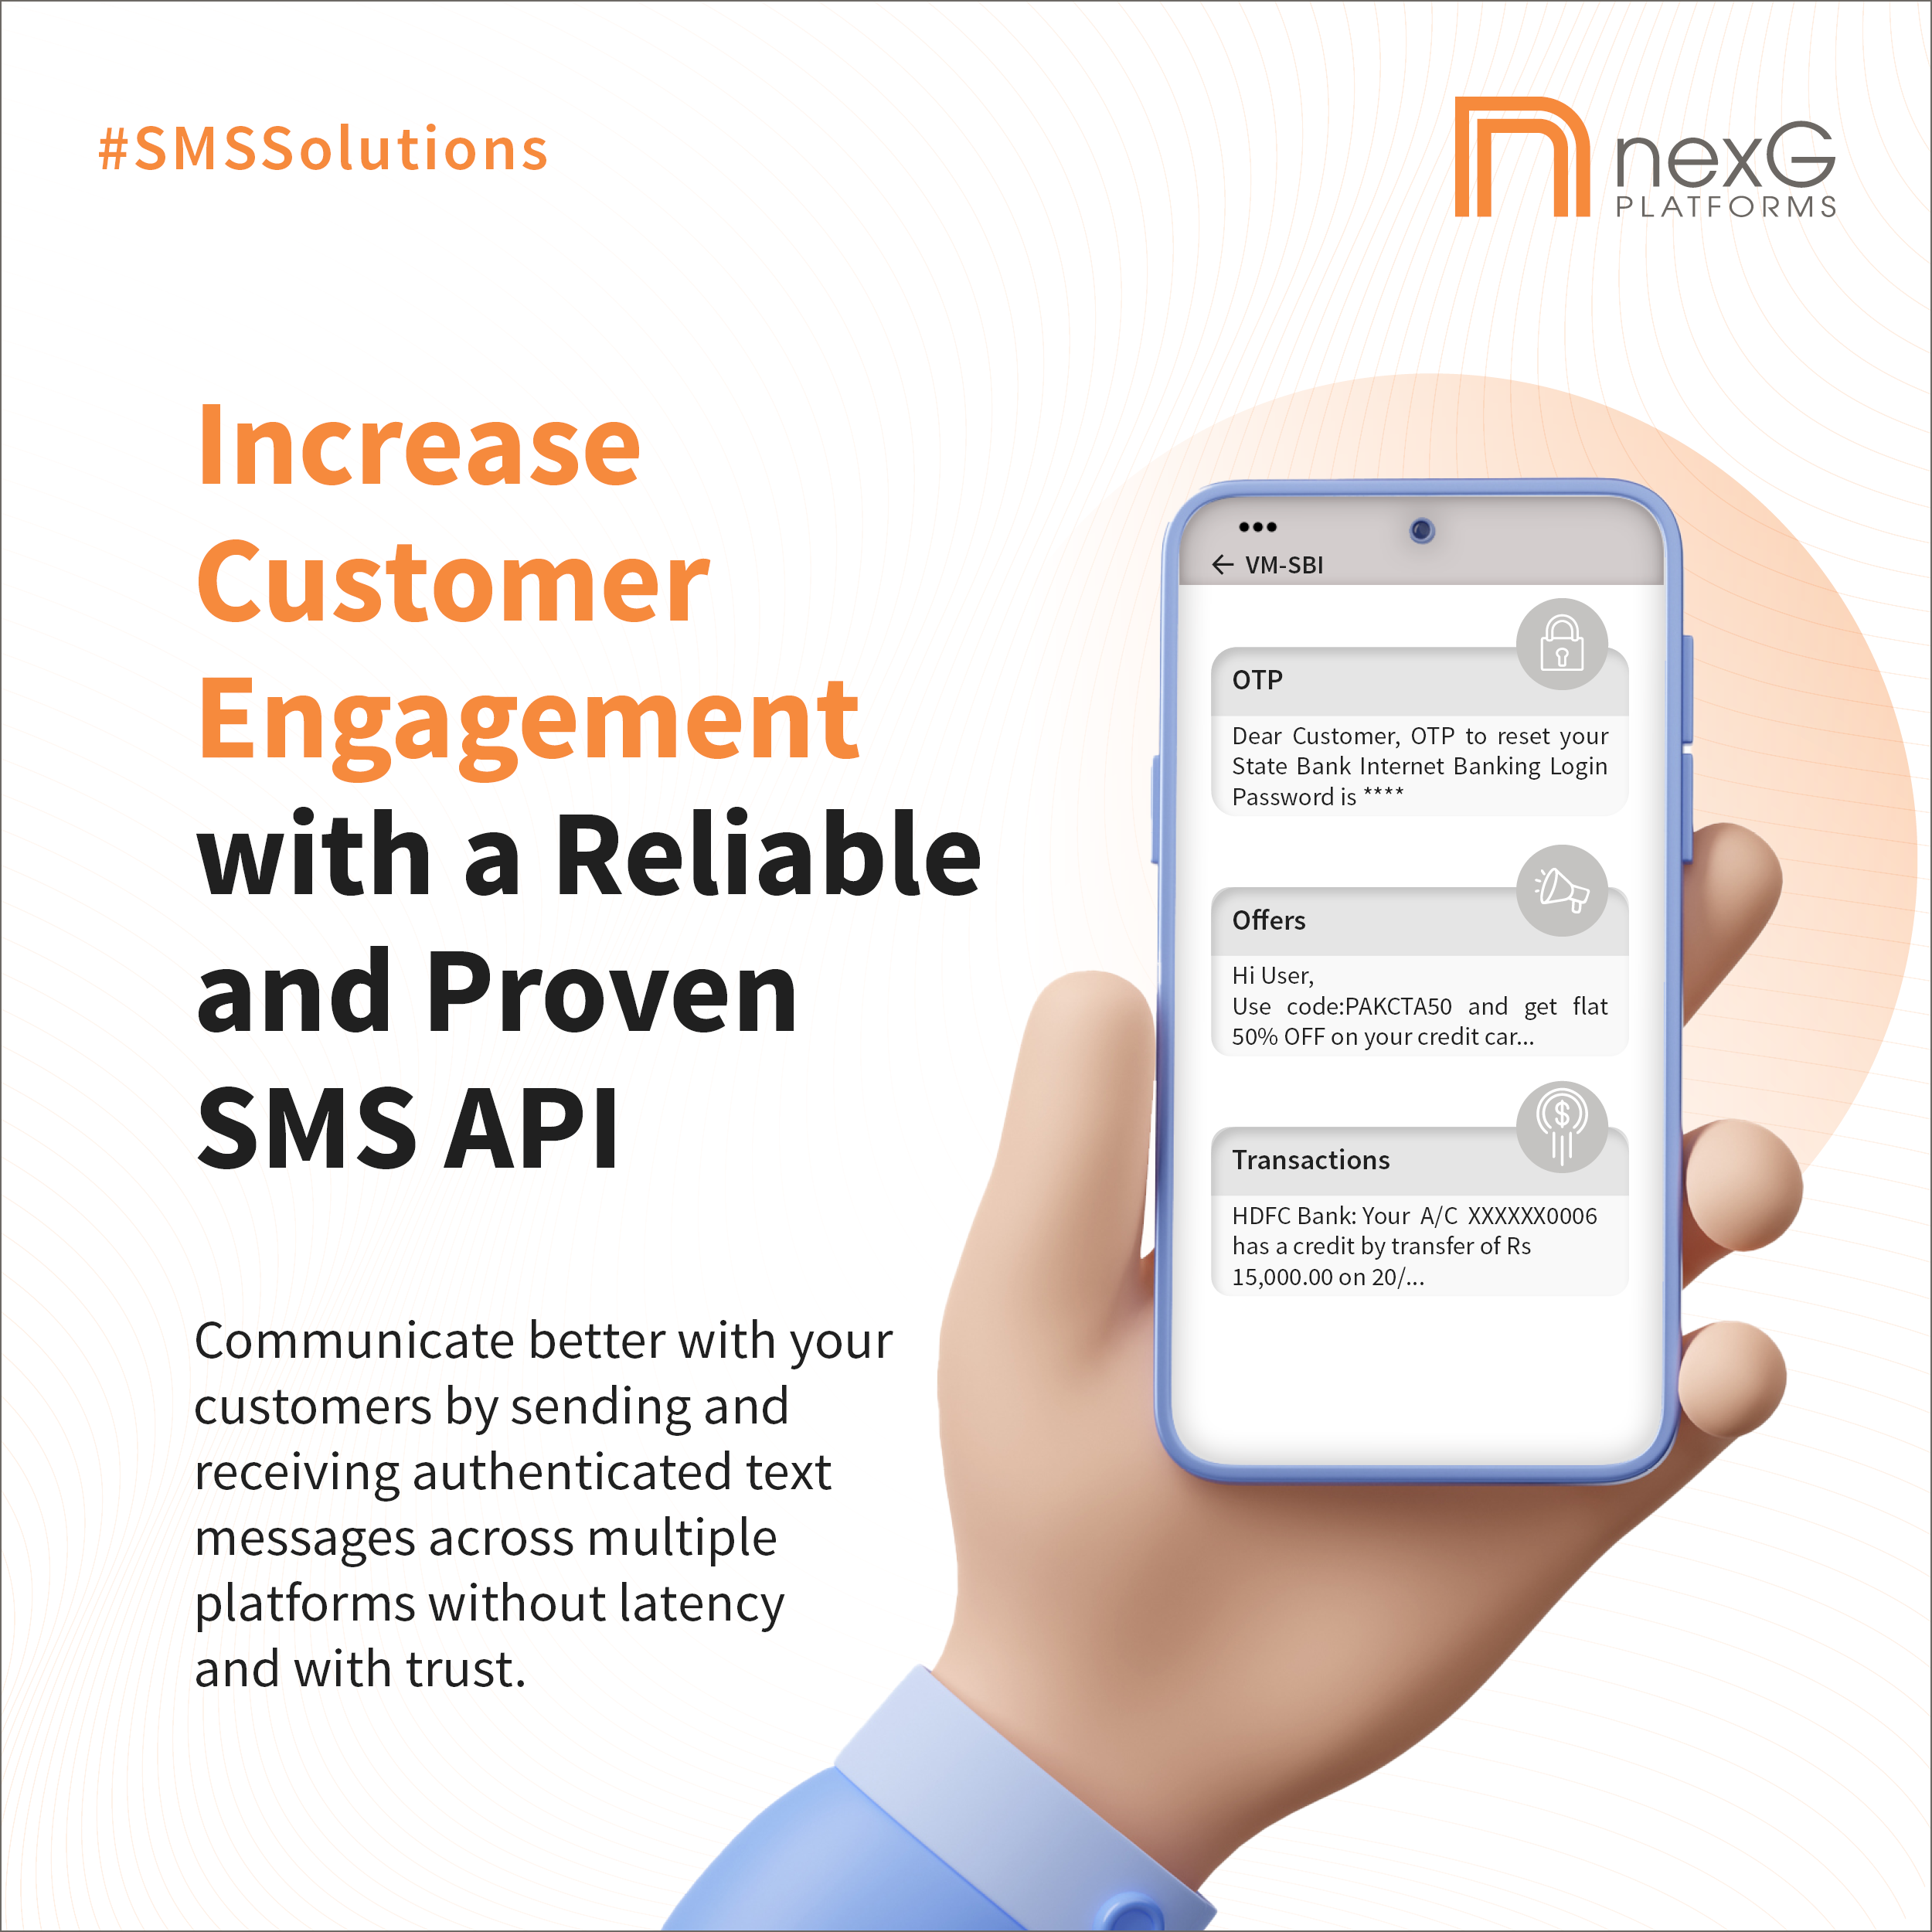 nexG Platforms provides a secure and compliant platform for two-way conversations at scale. With 2-way SMS conversations via dedicated long and short codes, customers can message you back for a personalised experience.